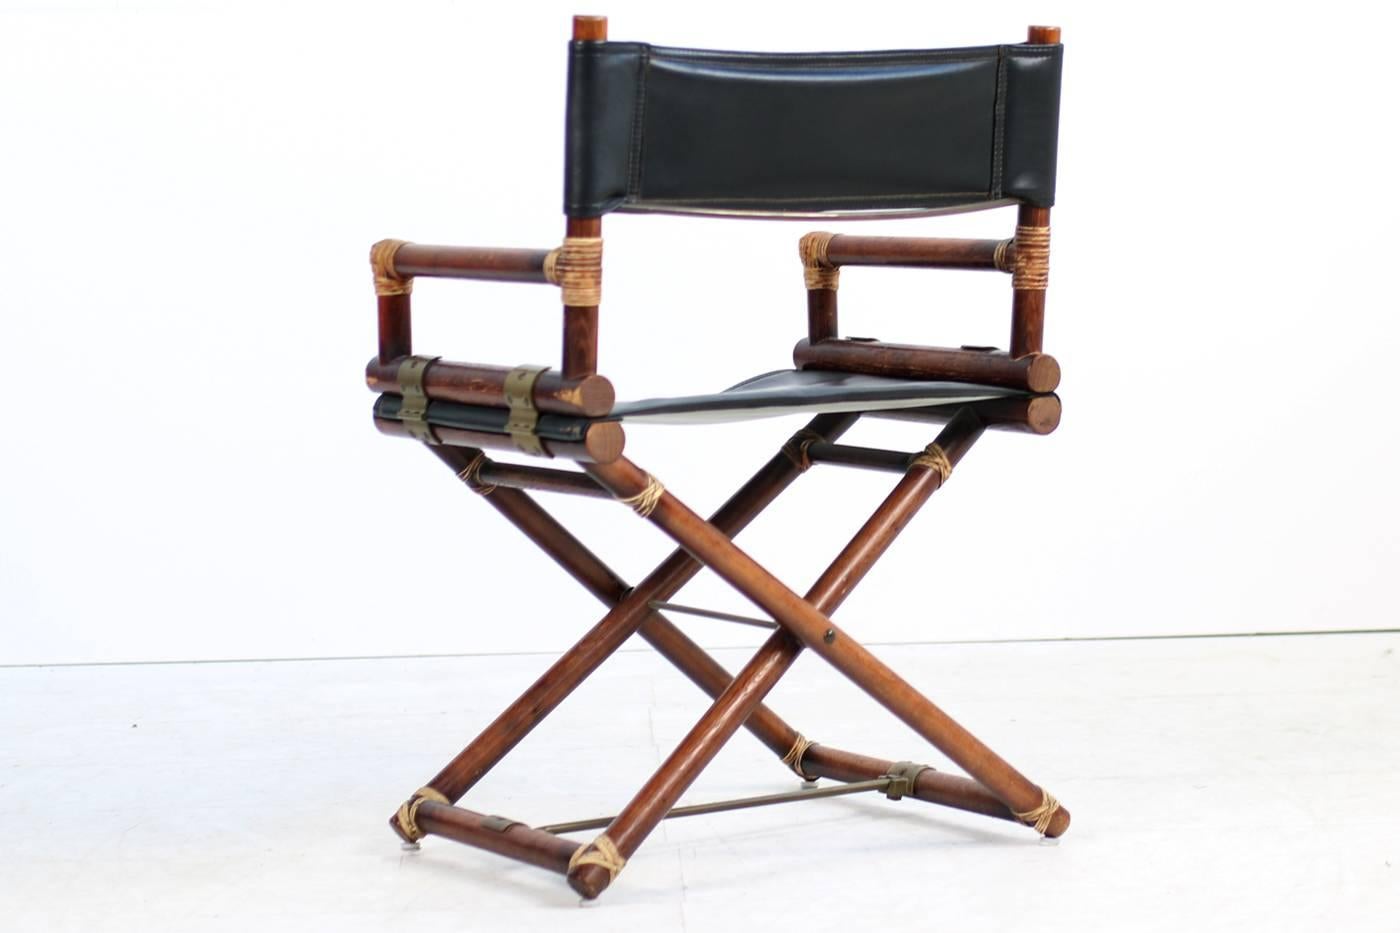 Fantastic Director's folding chair, bamboo, oak, black leather and brass, it's the early edition with brass parts. Hans Kaufeld license, purchased in the 1950s
Great condition, wood, leather and brass with beautiful patina, folding mechanism works